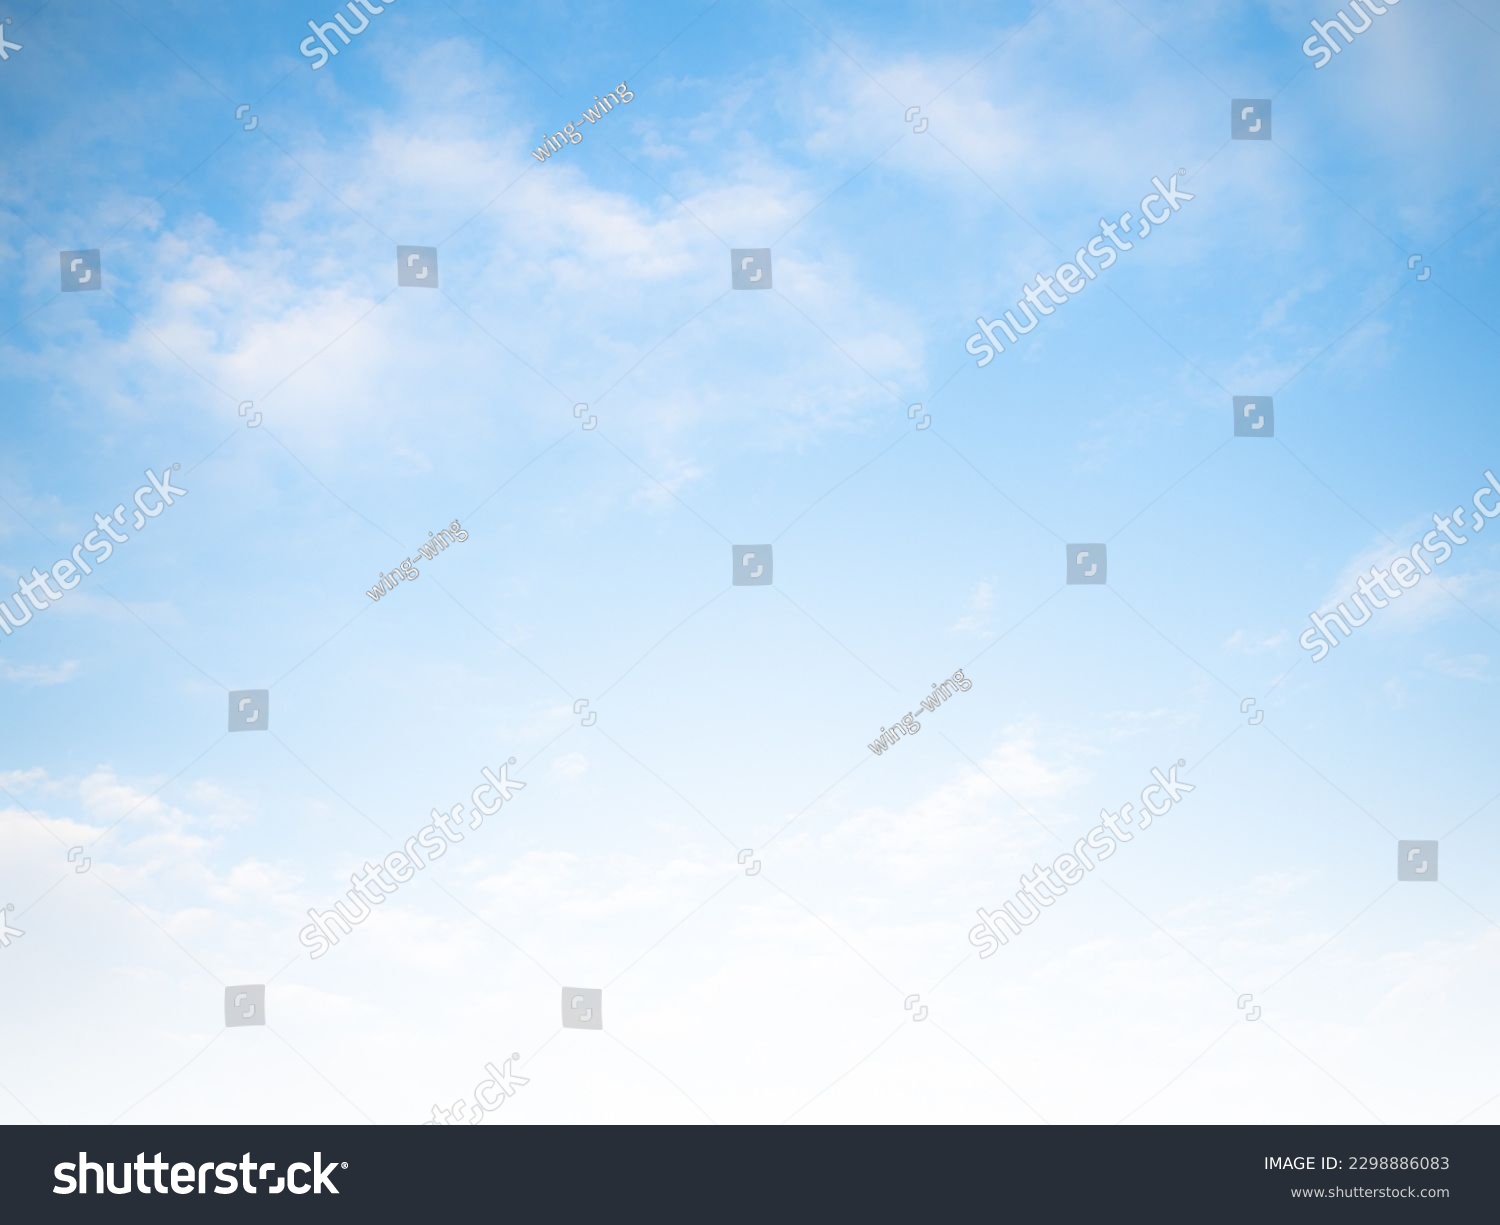 Blue Sky Background Heaven Summer Nature Light White Cloud Beauty Bright Color Day Environment Sunlight Beautiful Weater Air Scene Zero Carbon Cloudscape Outdoor Cloudy Hight View. #2298886083